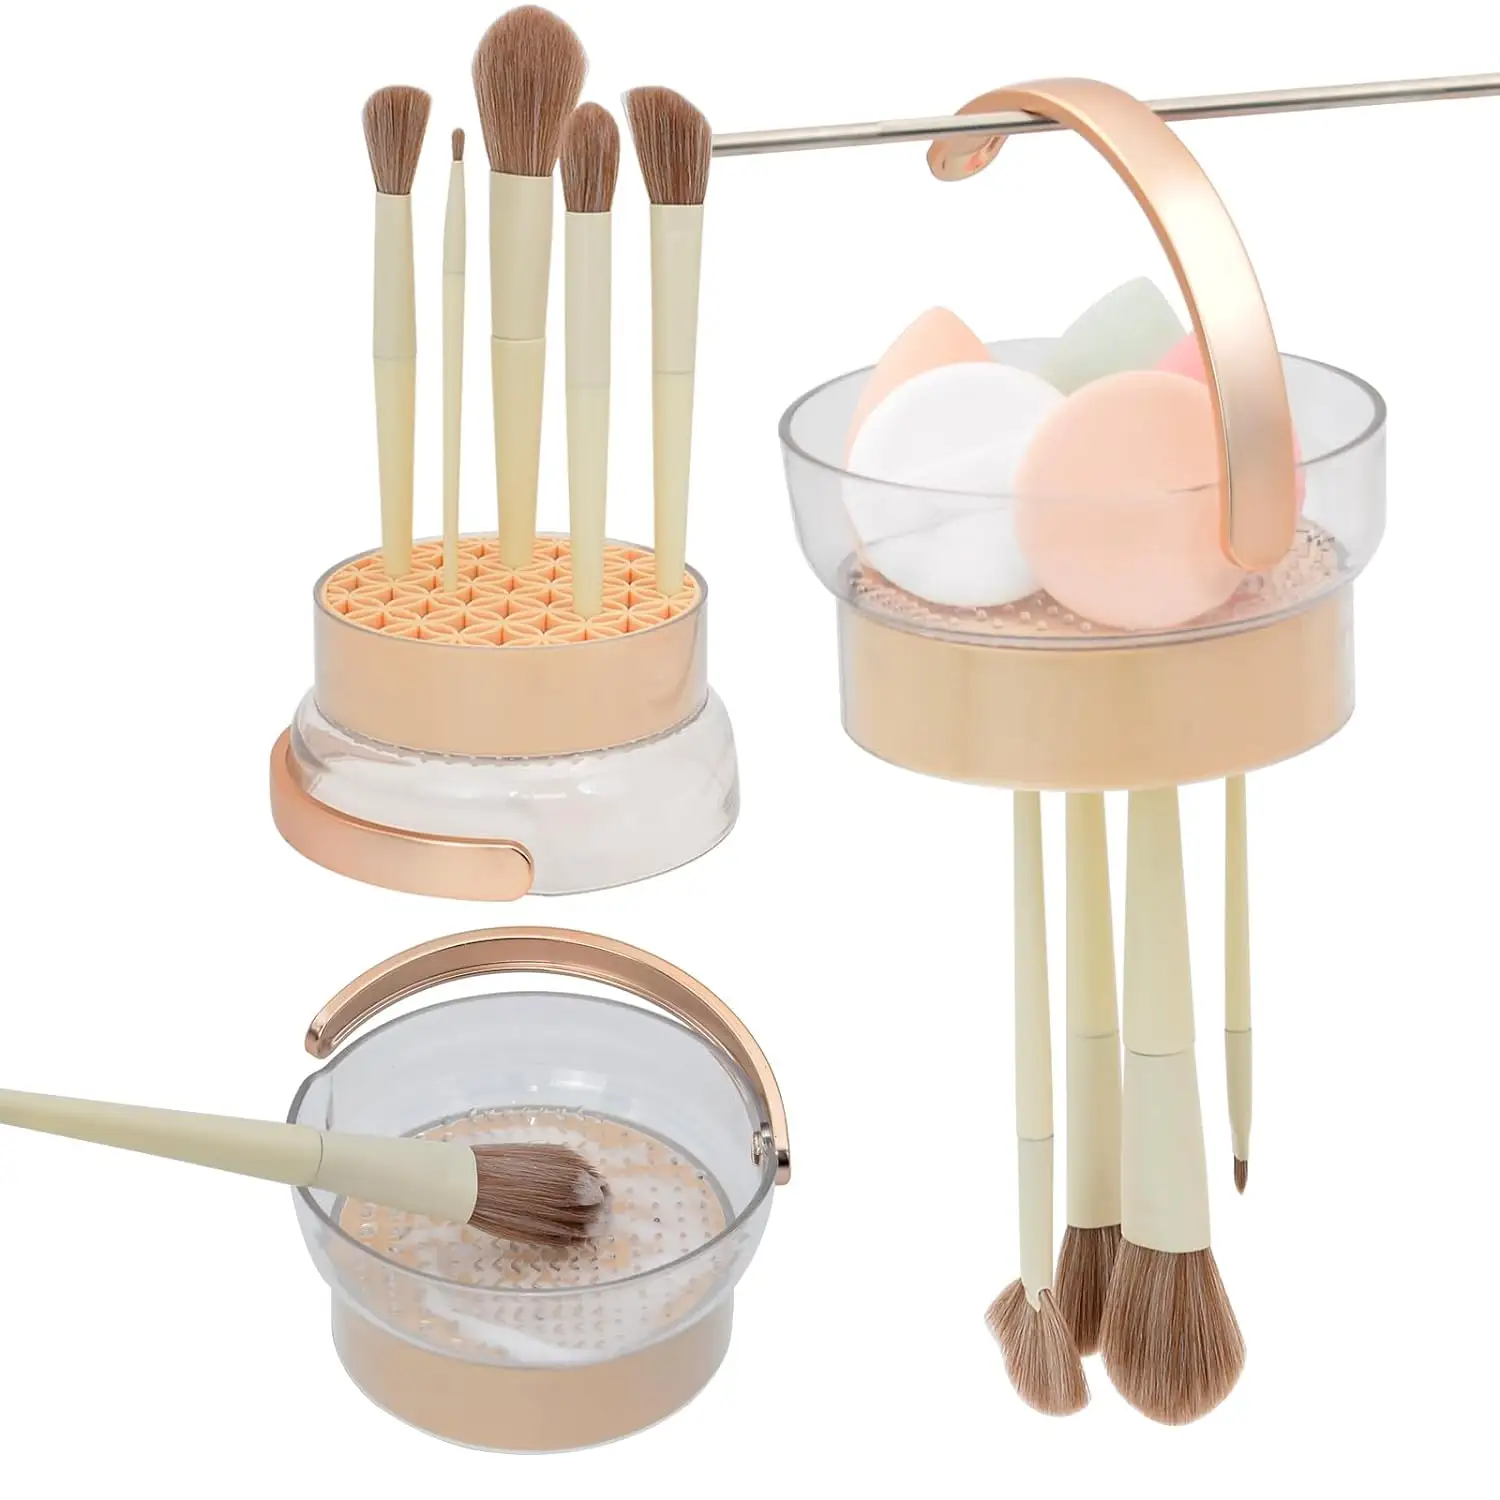 Makeup Brush Cleaning Mat and Easy to Dry with Upside Down.3 in 1 Makeup Brush Holder Cosmetic Facial Brush Organizer